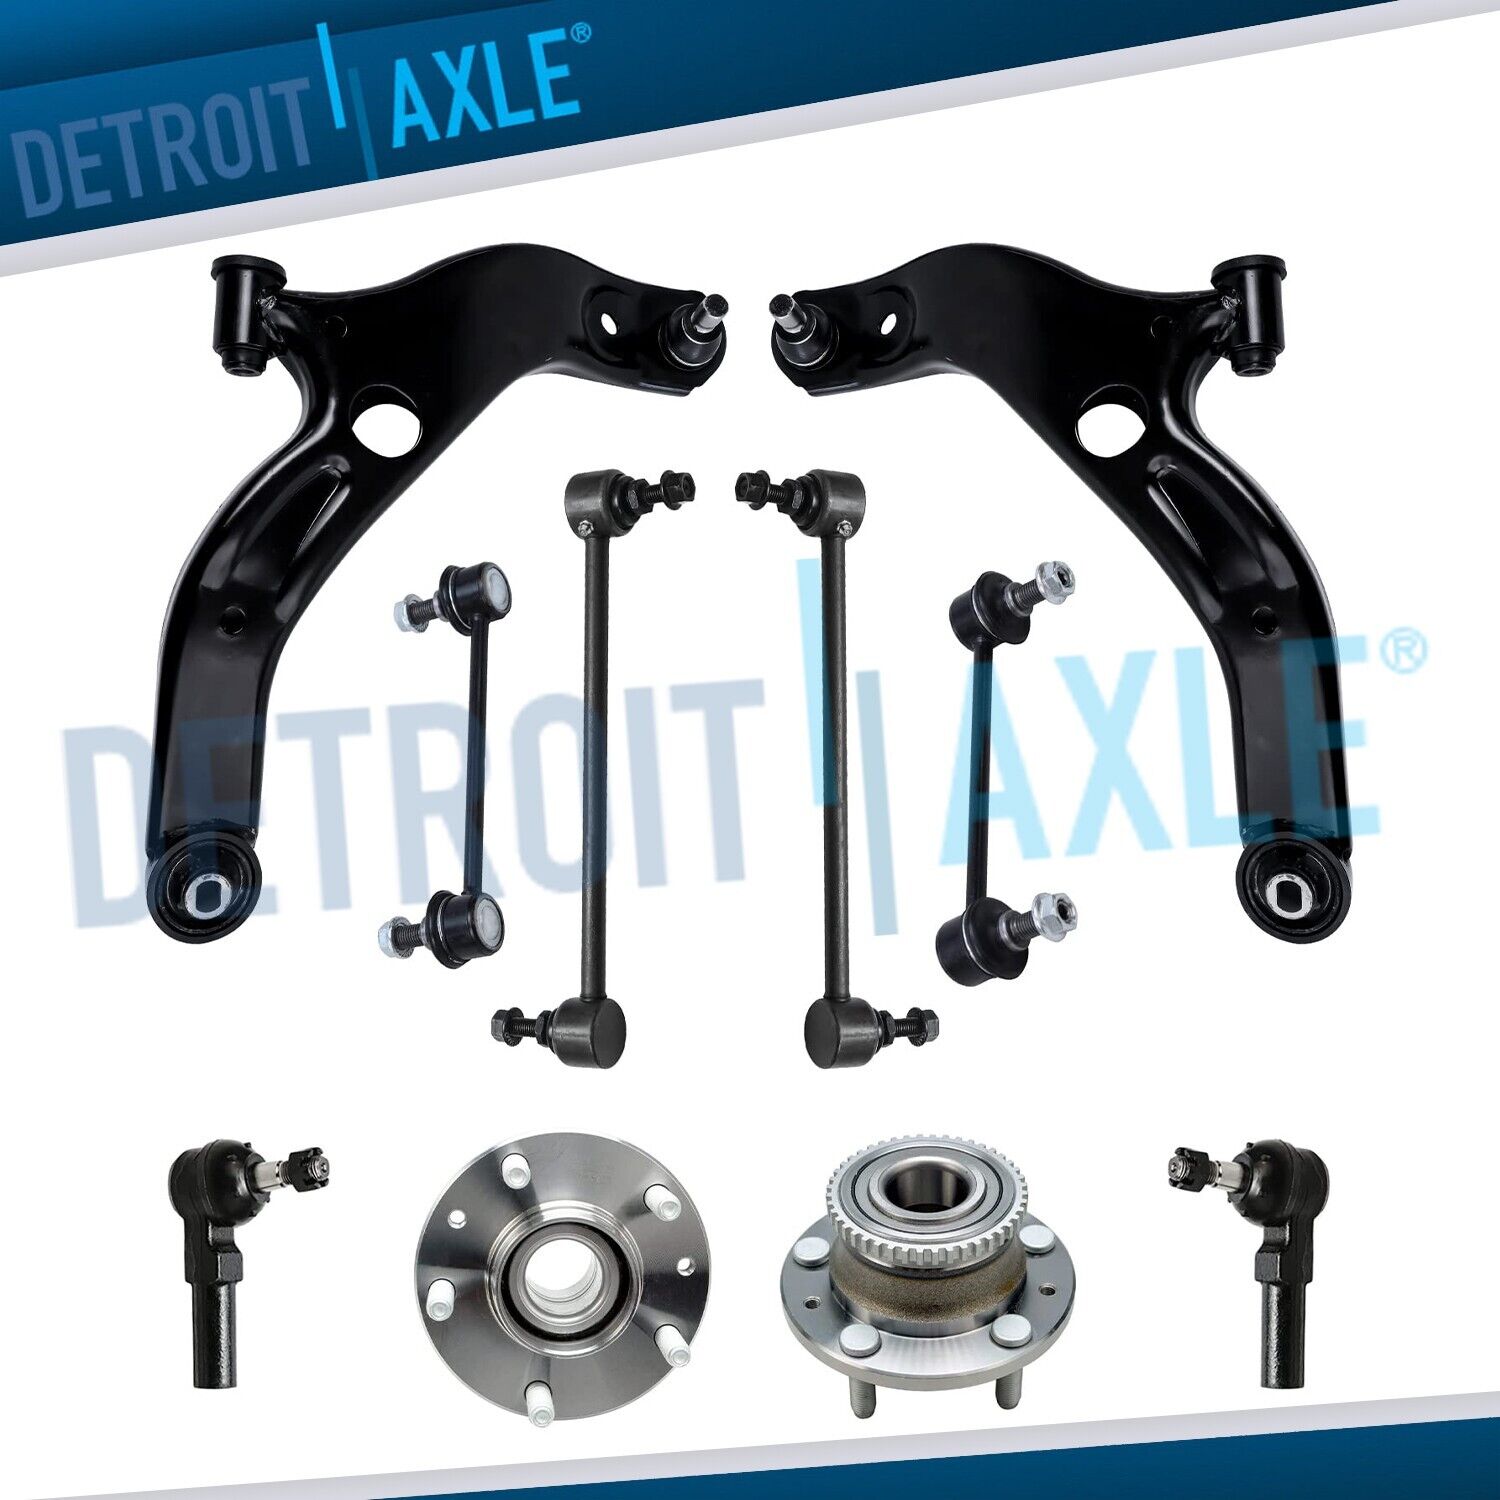 Brand New 10pc Complete Front and Rear Suspension Kit for 2001-03 Mazda Protege5